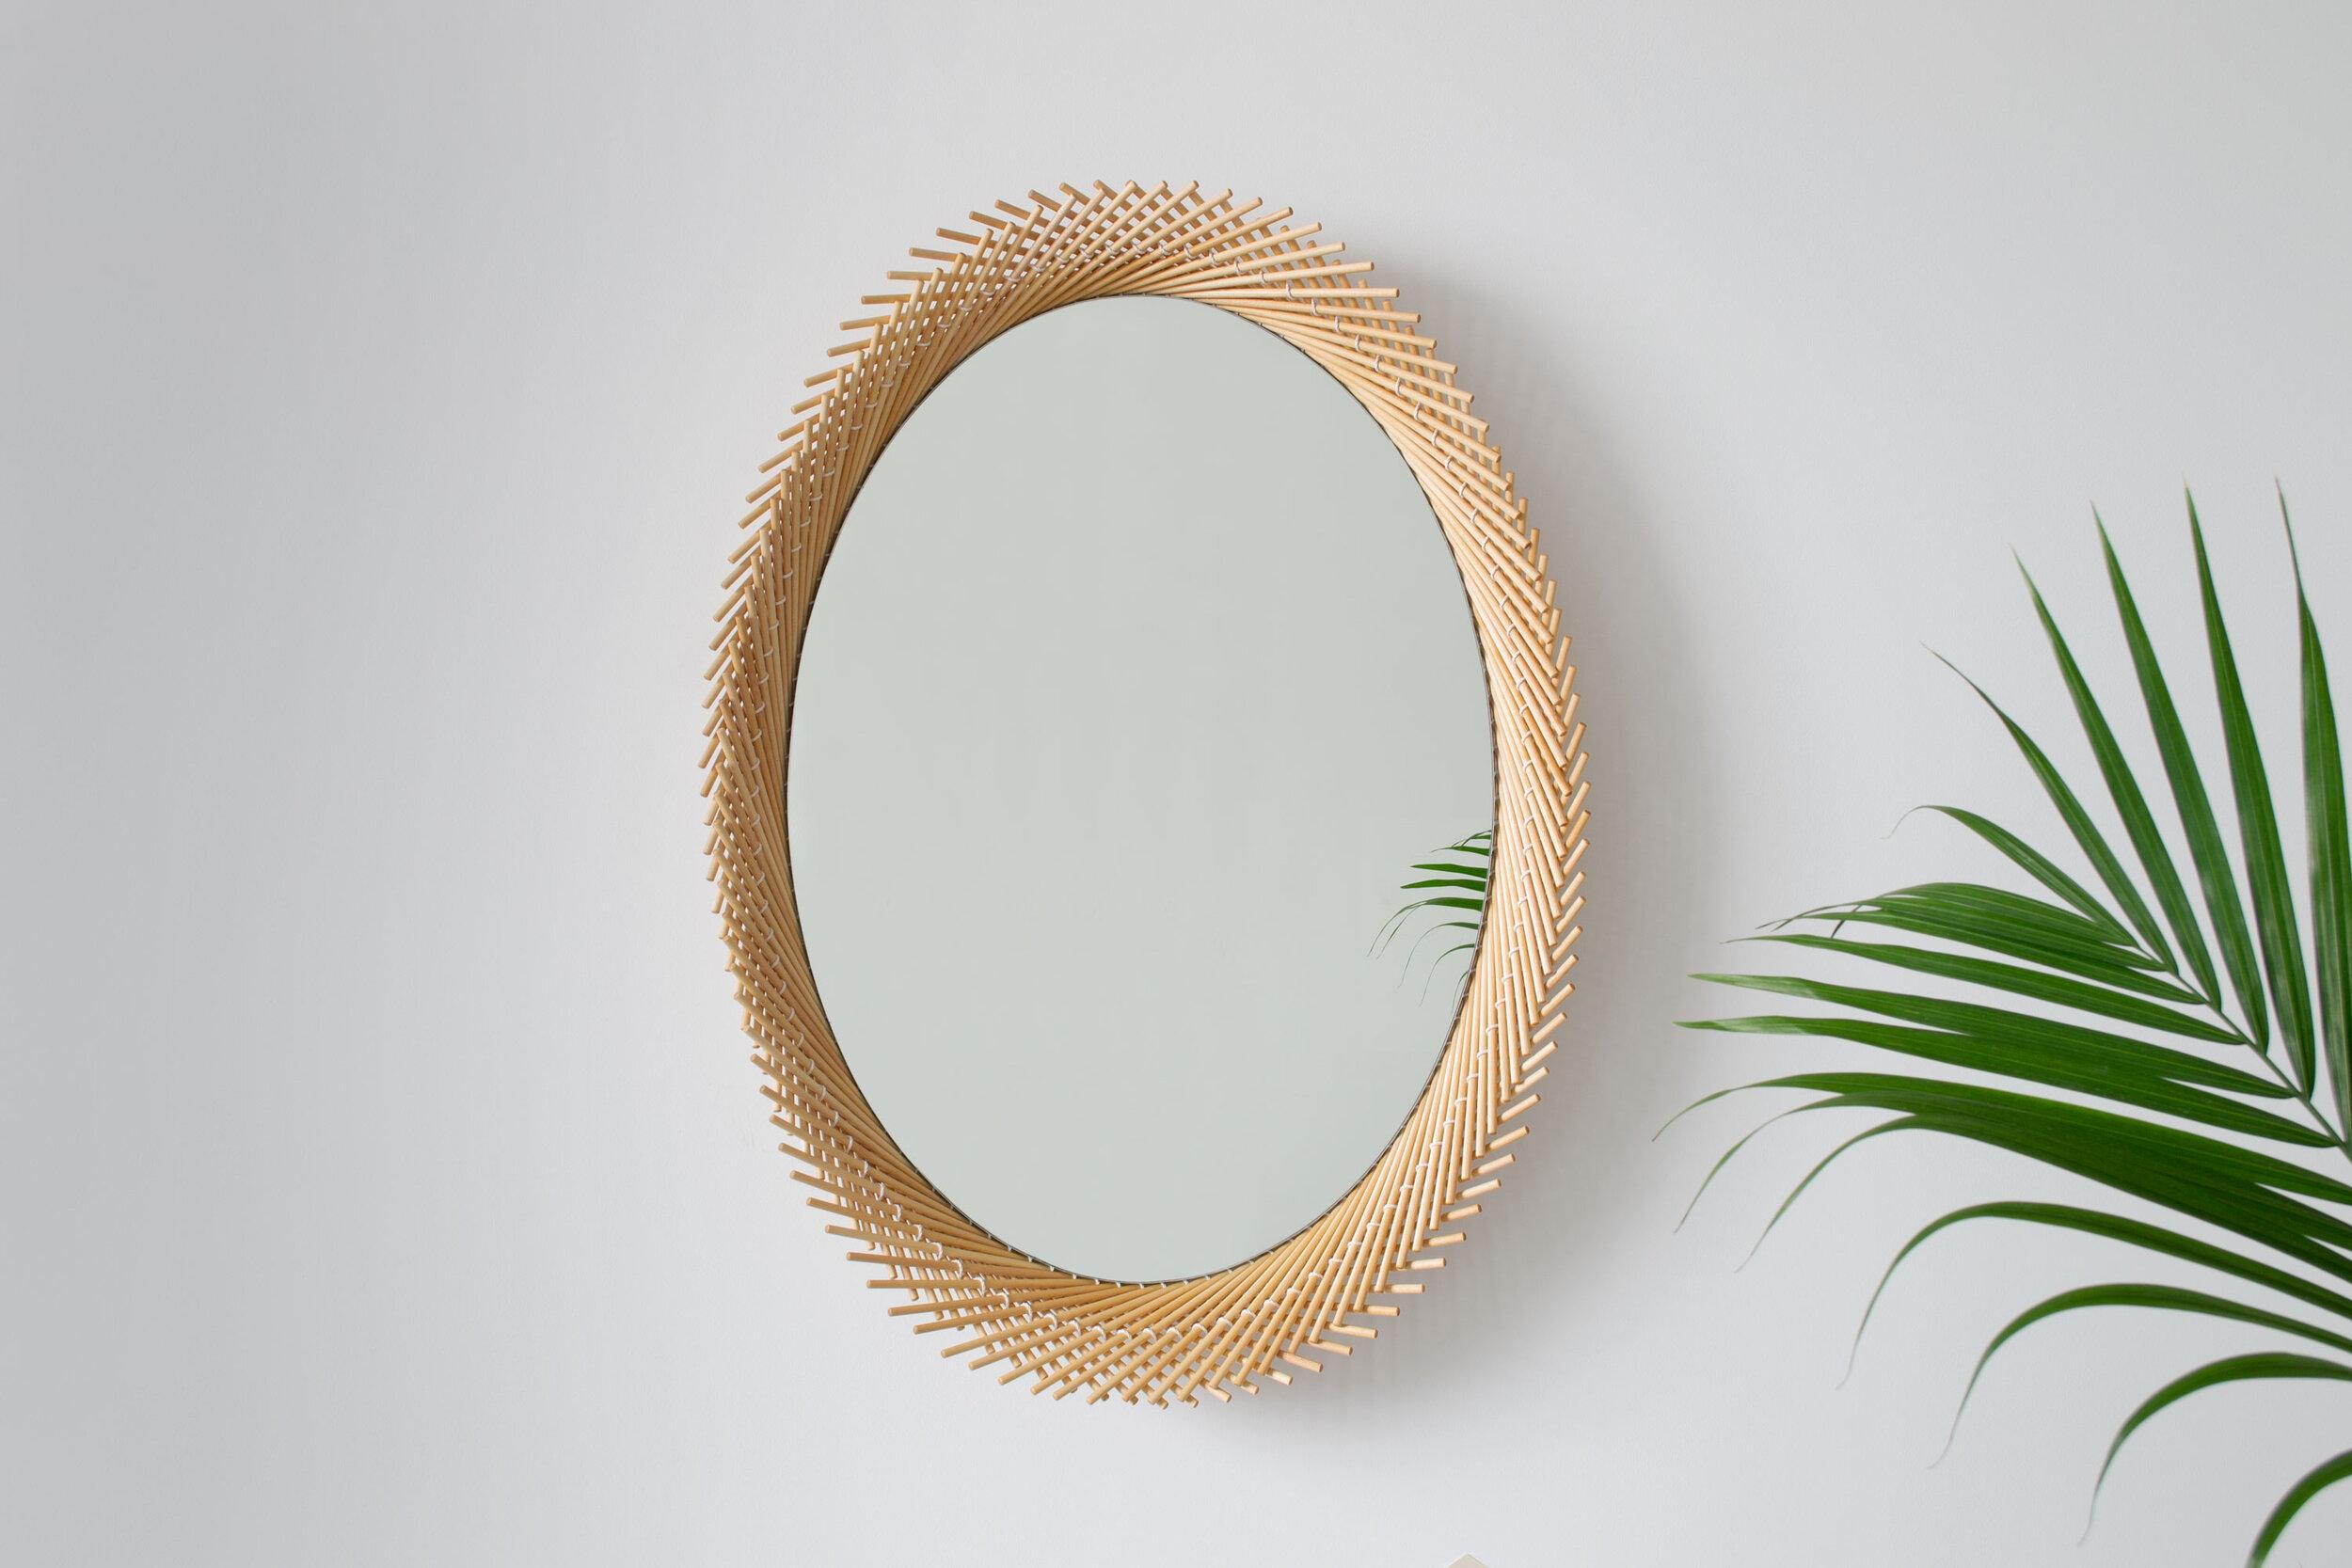 The Oval Mirror pushes the strict geometry that occurs as a result of stitching the dowels together to create a dynamic edge. Each layer of the Mooda rises and falls inversely to the other as they travel along the circumference of the mirror, giving